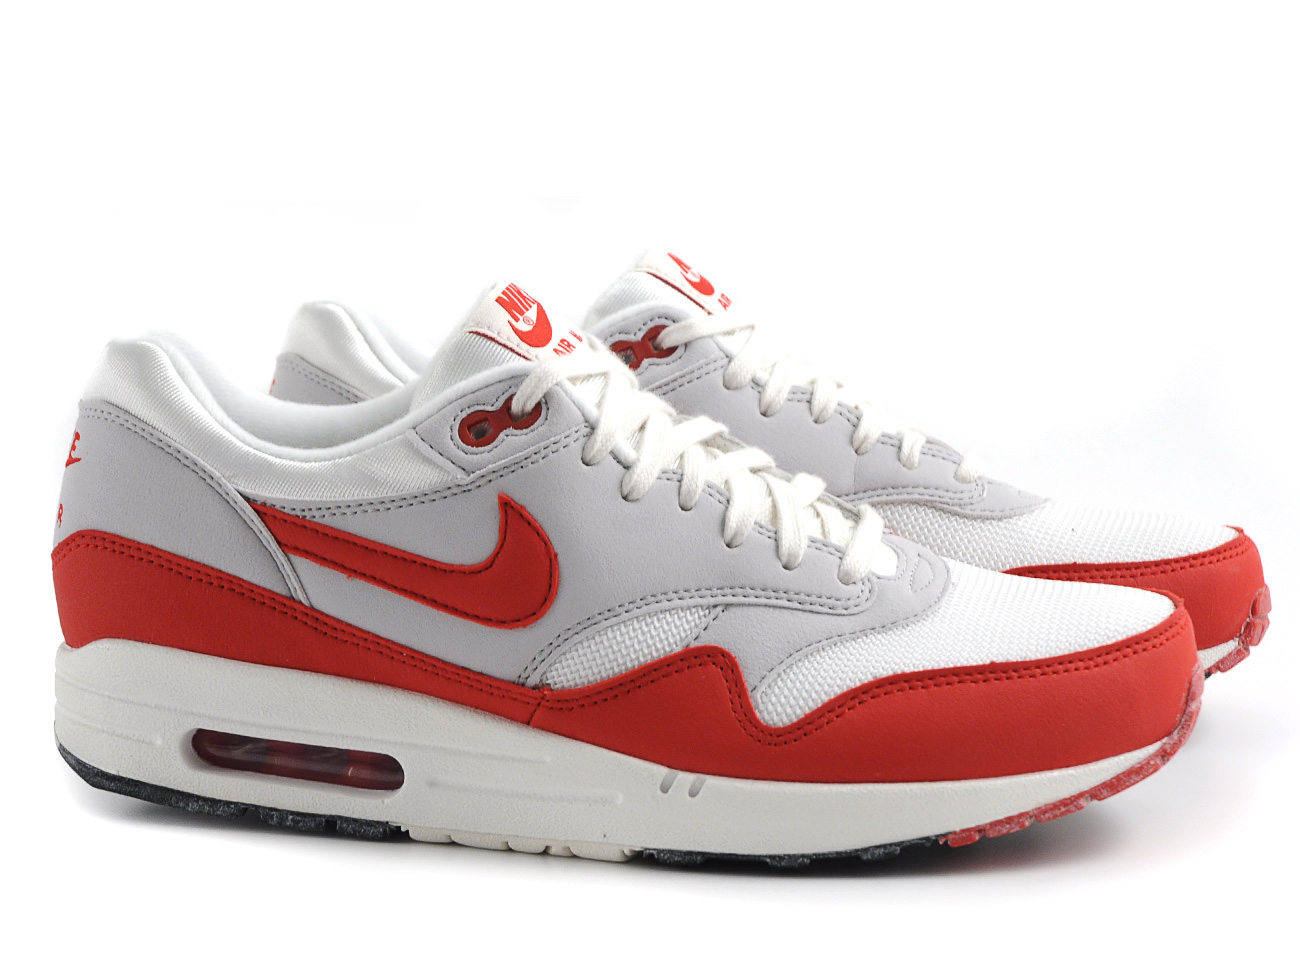 10 Sneakers Every New Sneakerhead Should Know - MASSES